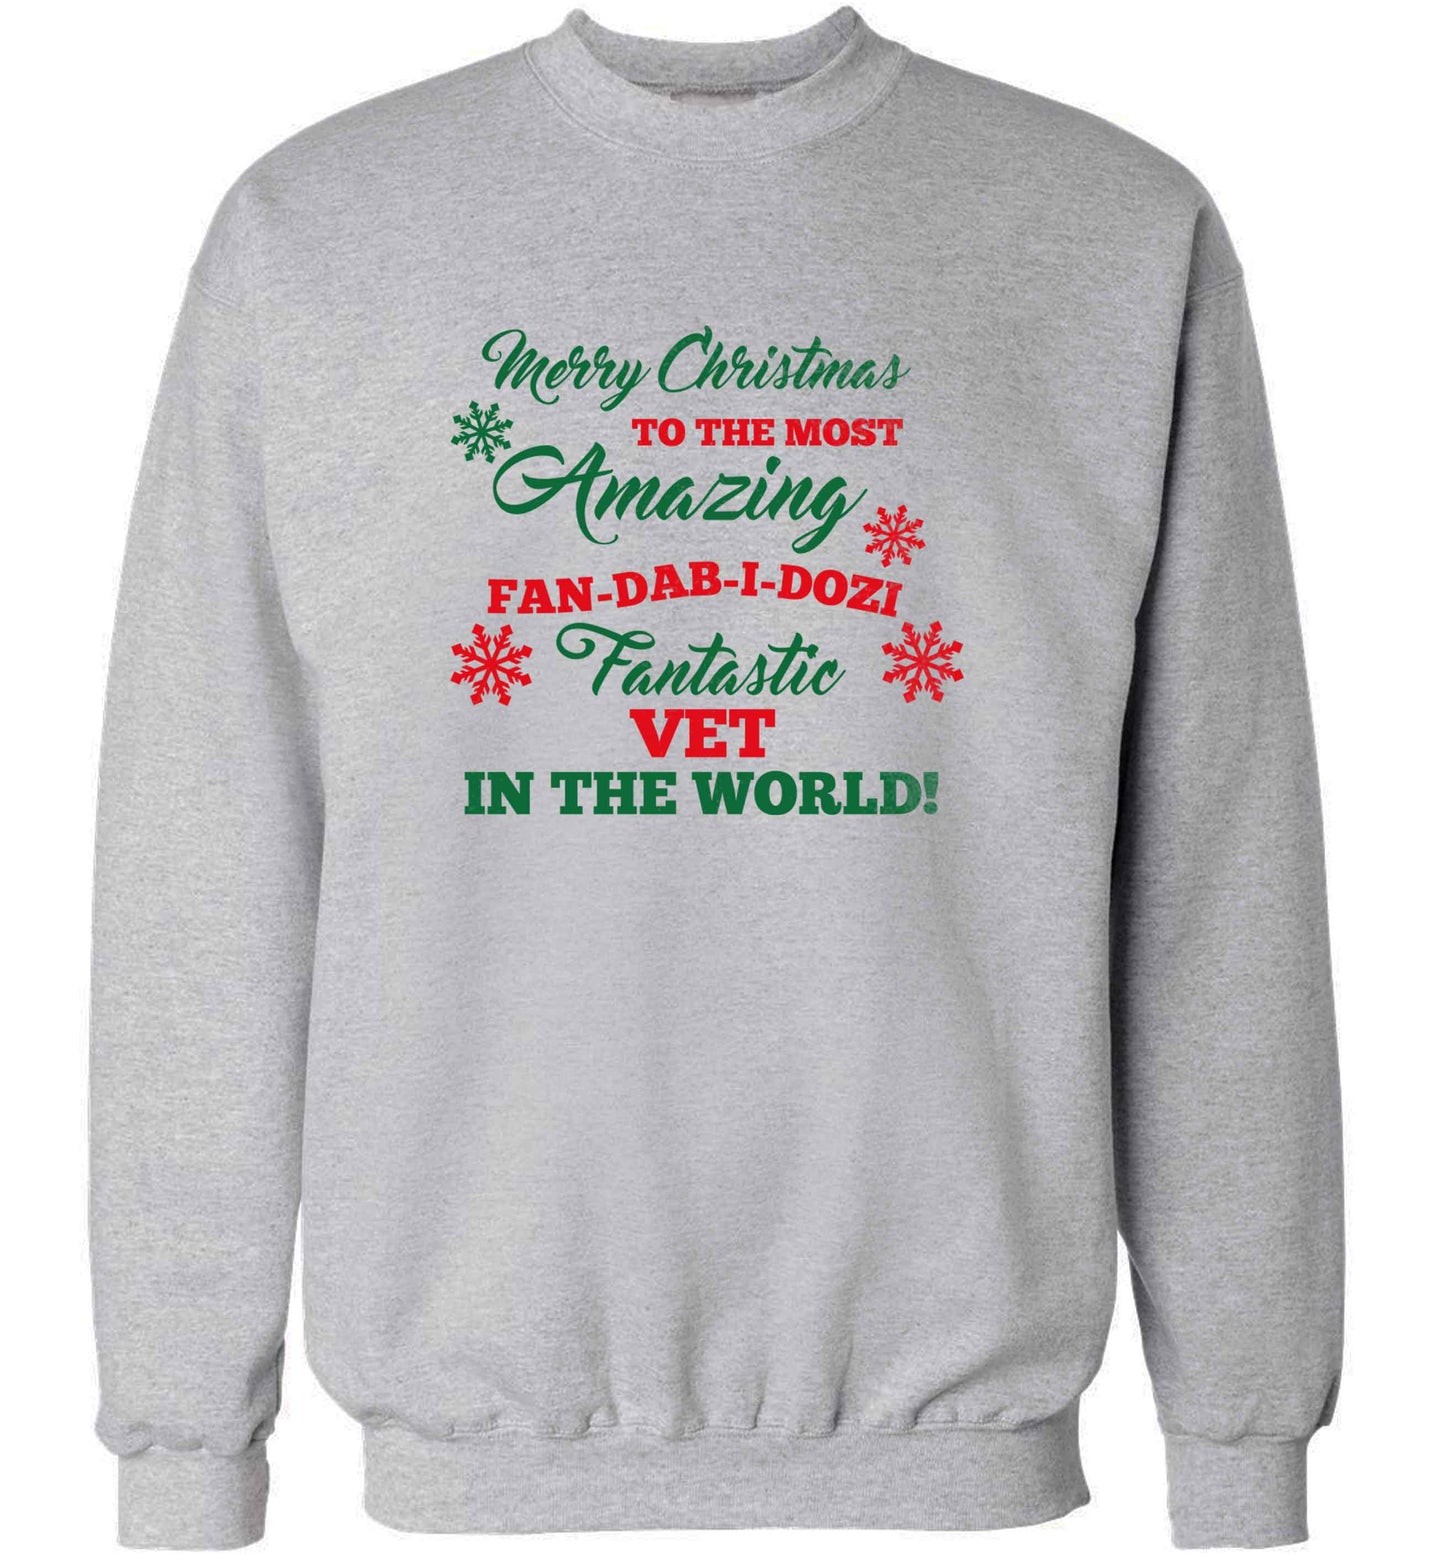 Merry Christmas to the most amazing vet in the world! adult's unisex grey sweater 2XL